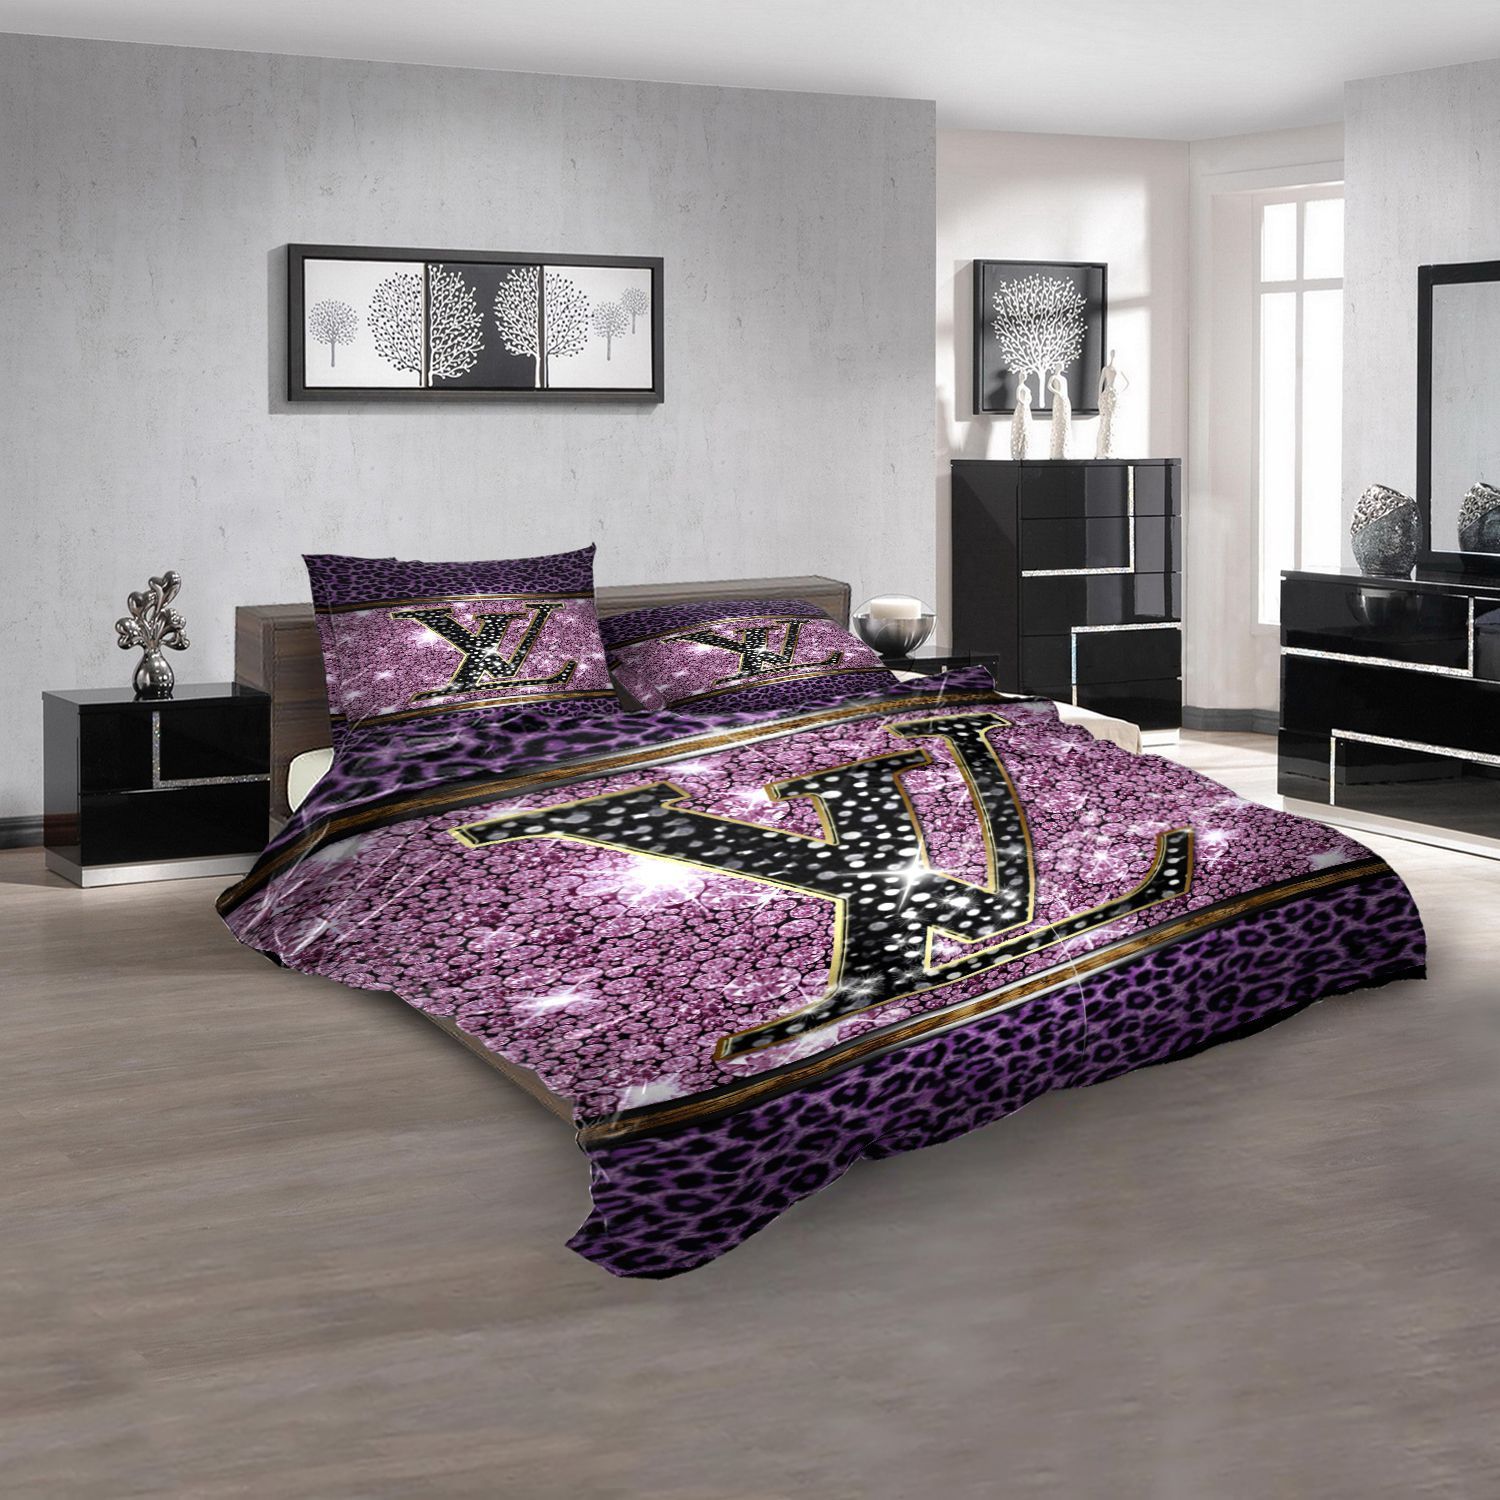 Let me show you about some luxury brand bedding set 2022 116